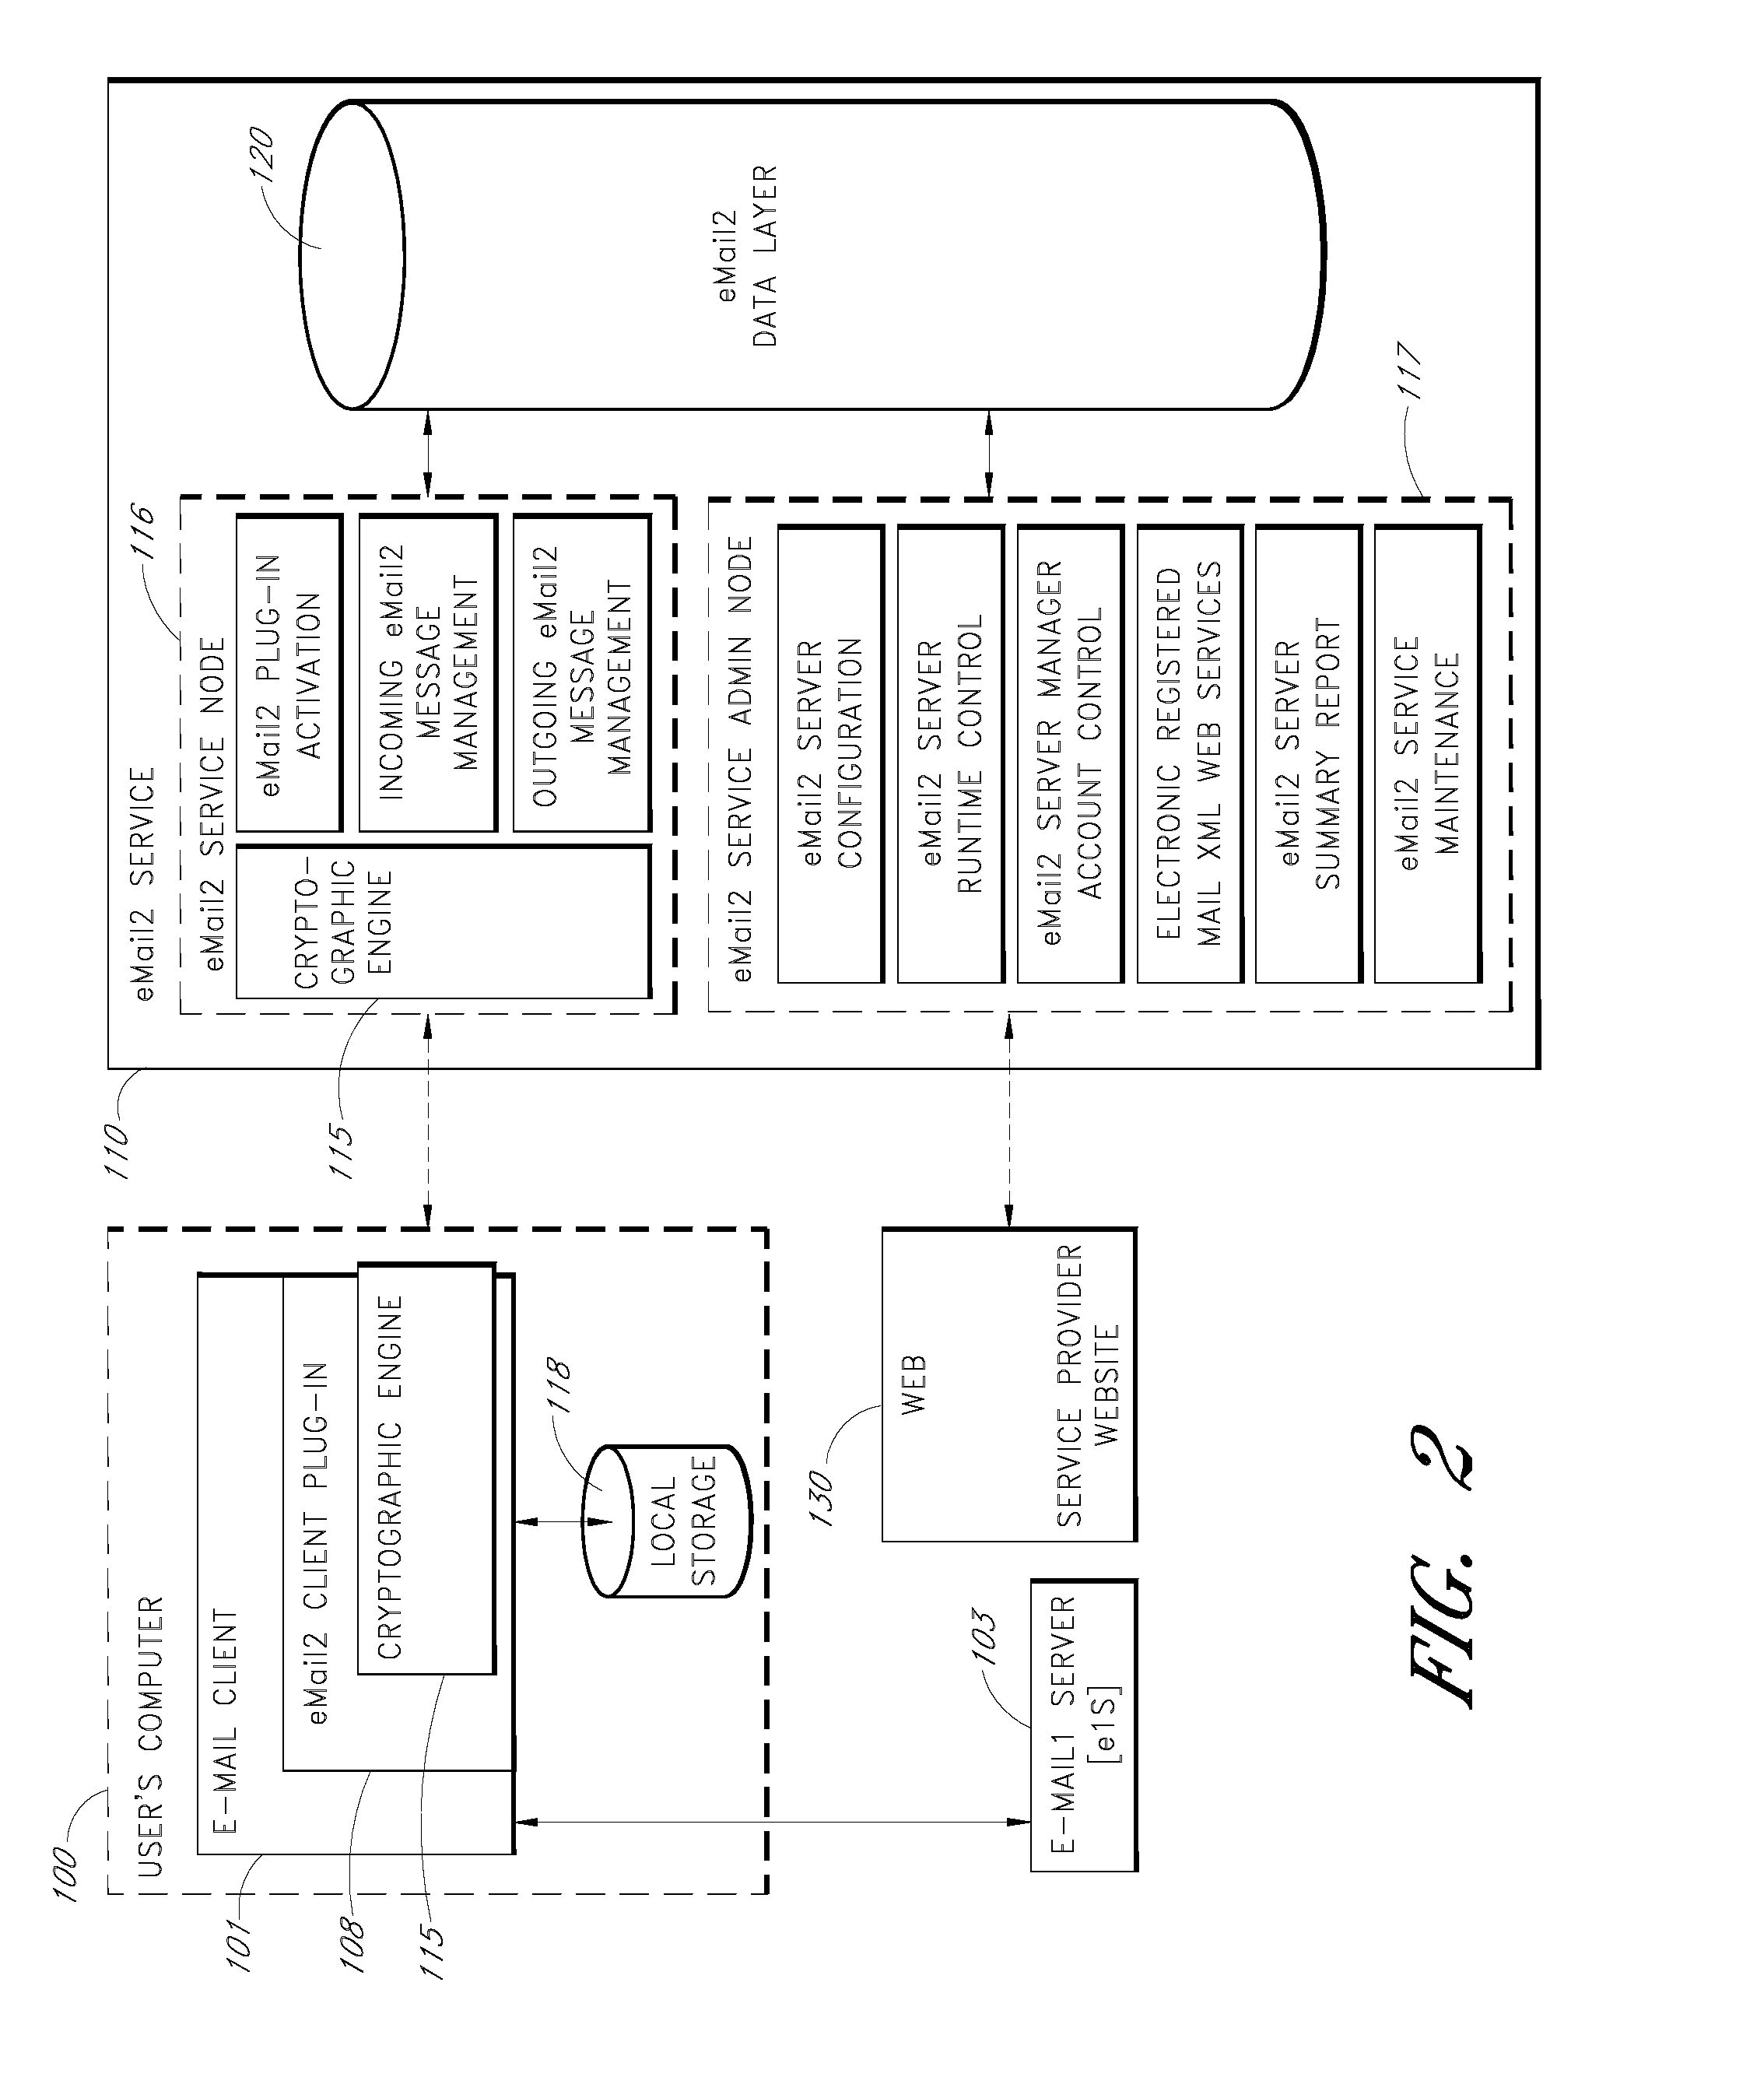 Electronic mail system with functionality for senders to control actions performed by message recipients